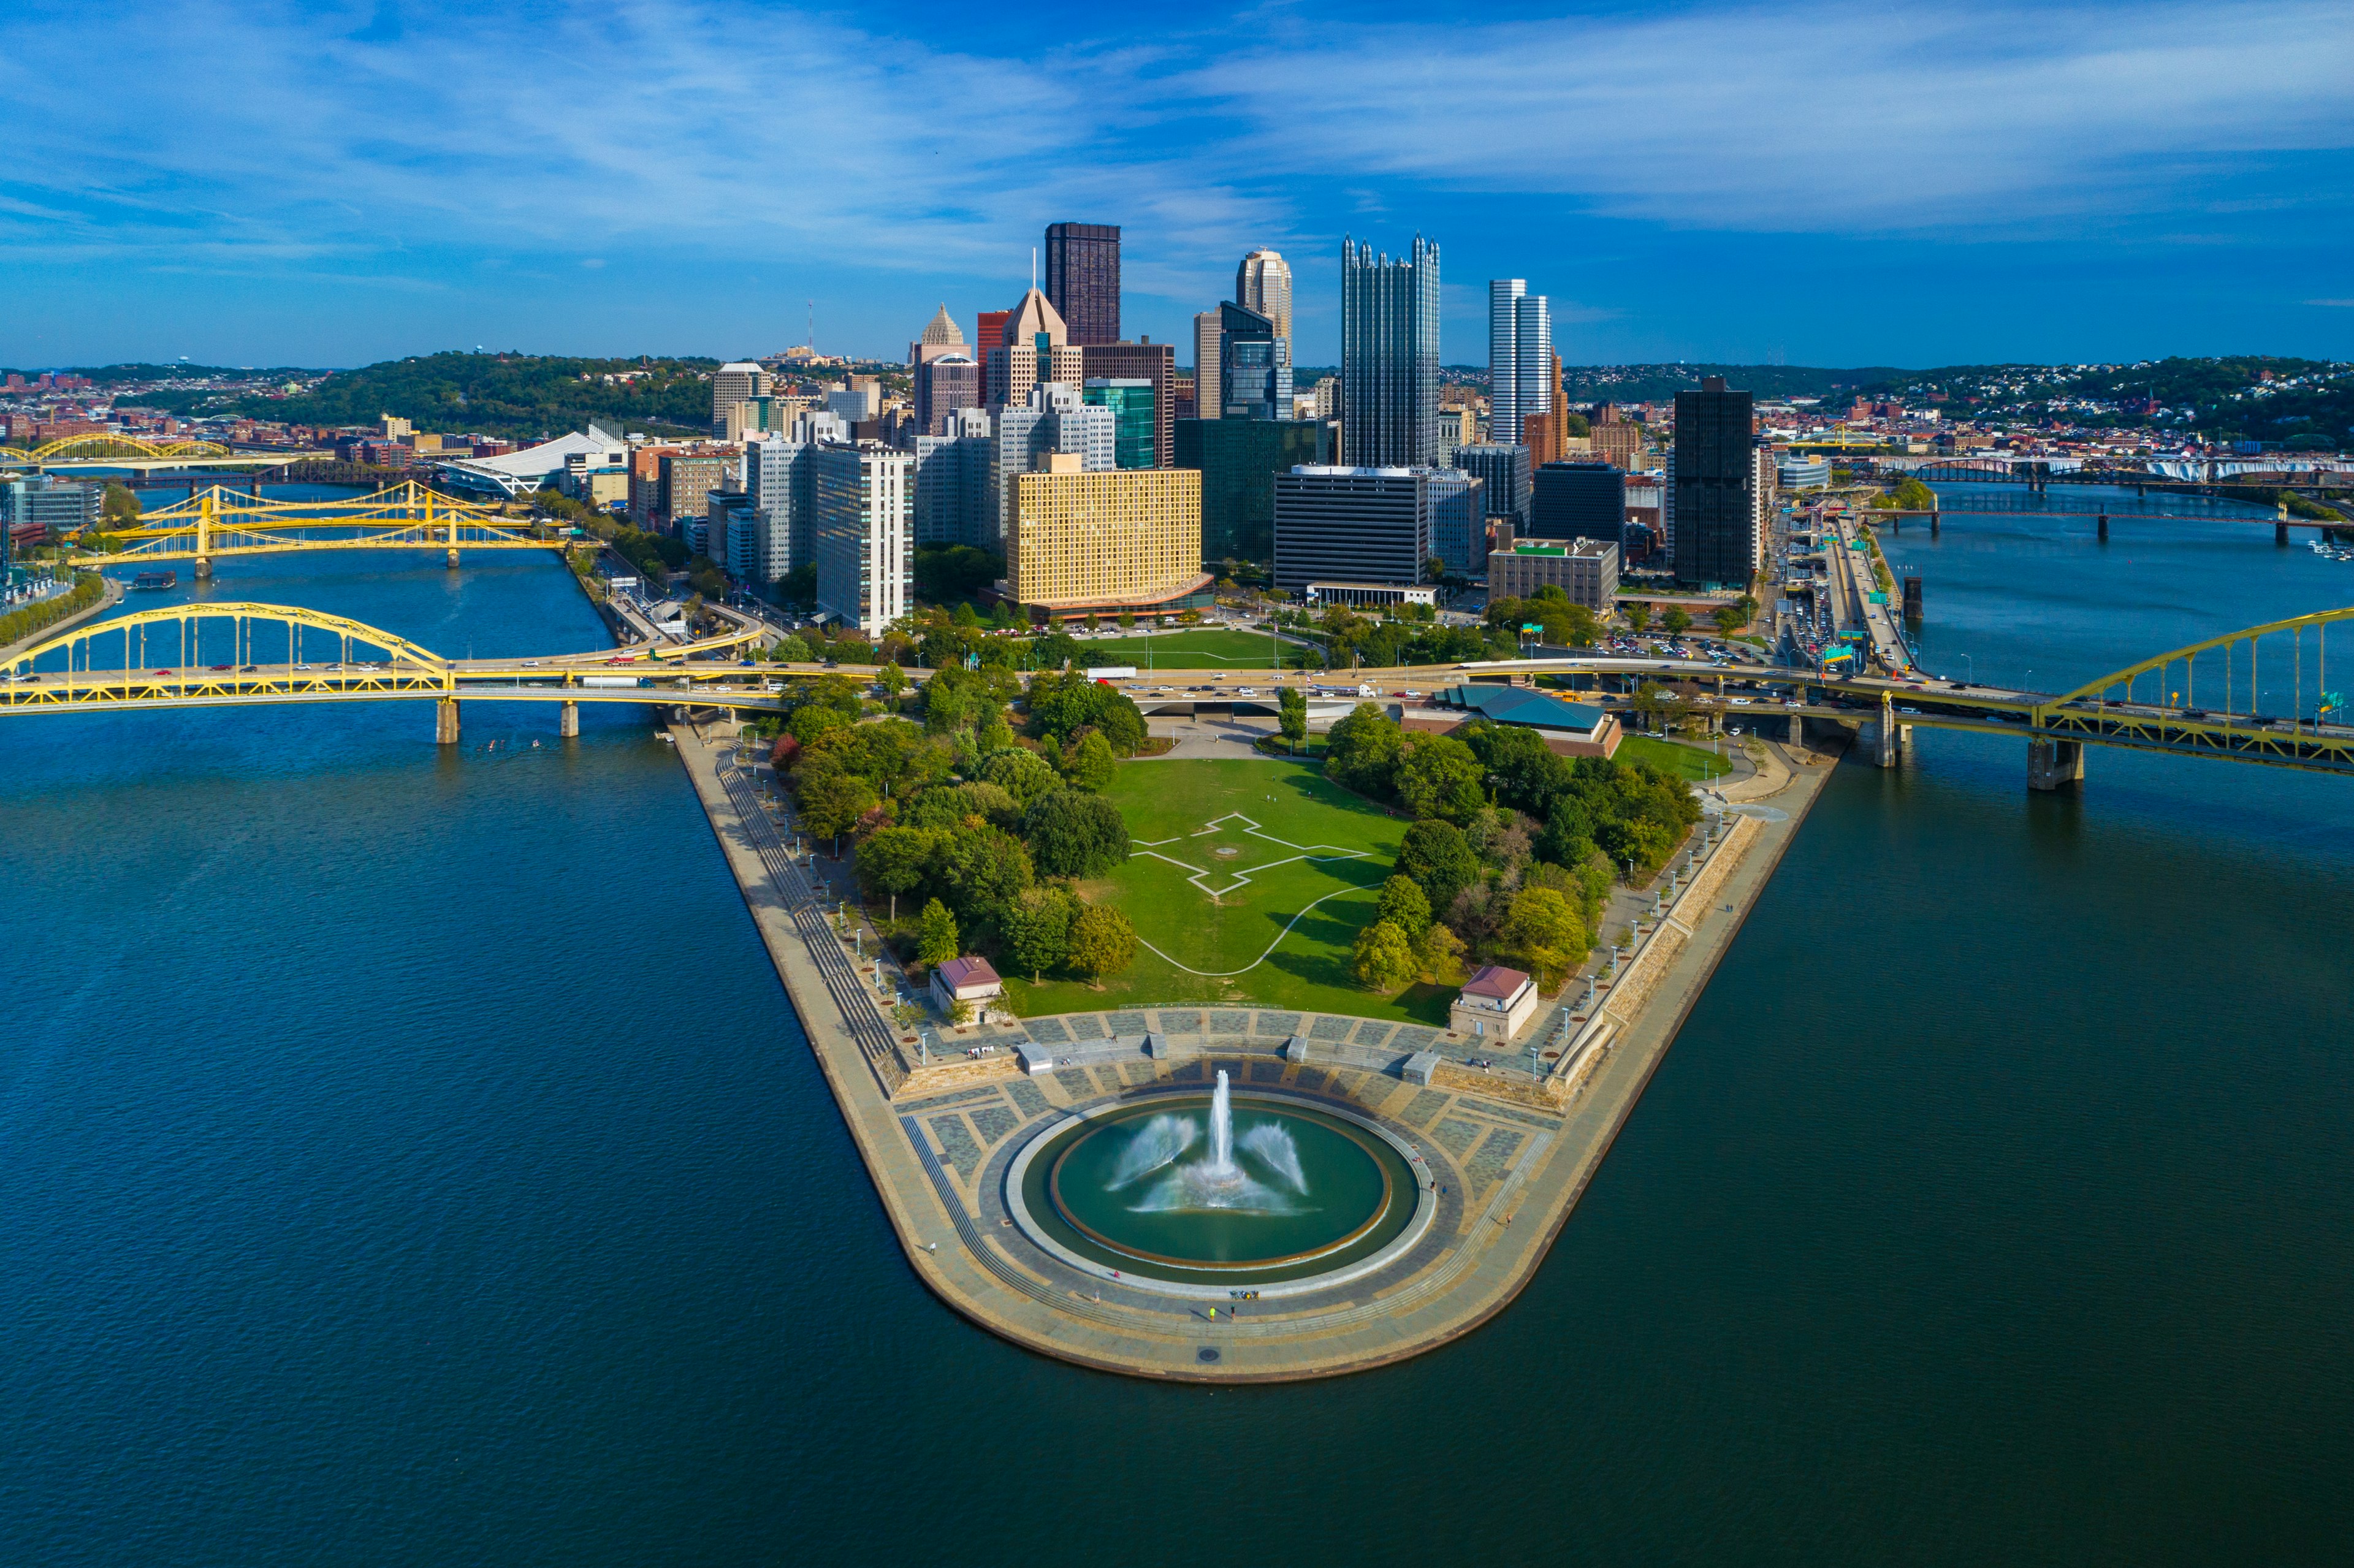 Downtown Pittsburgh skyline aerial view with Fort Duquesne (including a fountain), Point State Park, I-279, Allegheny River (left), Fort Duquesne Bridge (left), Monongahela River (right) and Fort Pitt Bridge (right) in the foreground.